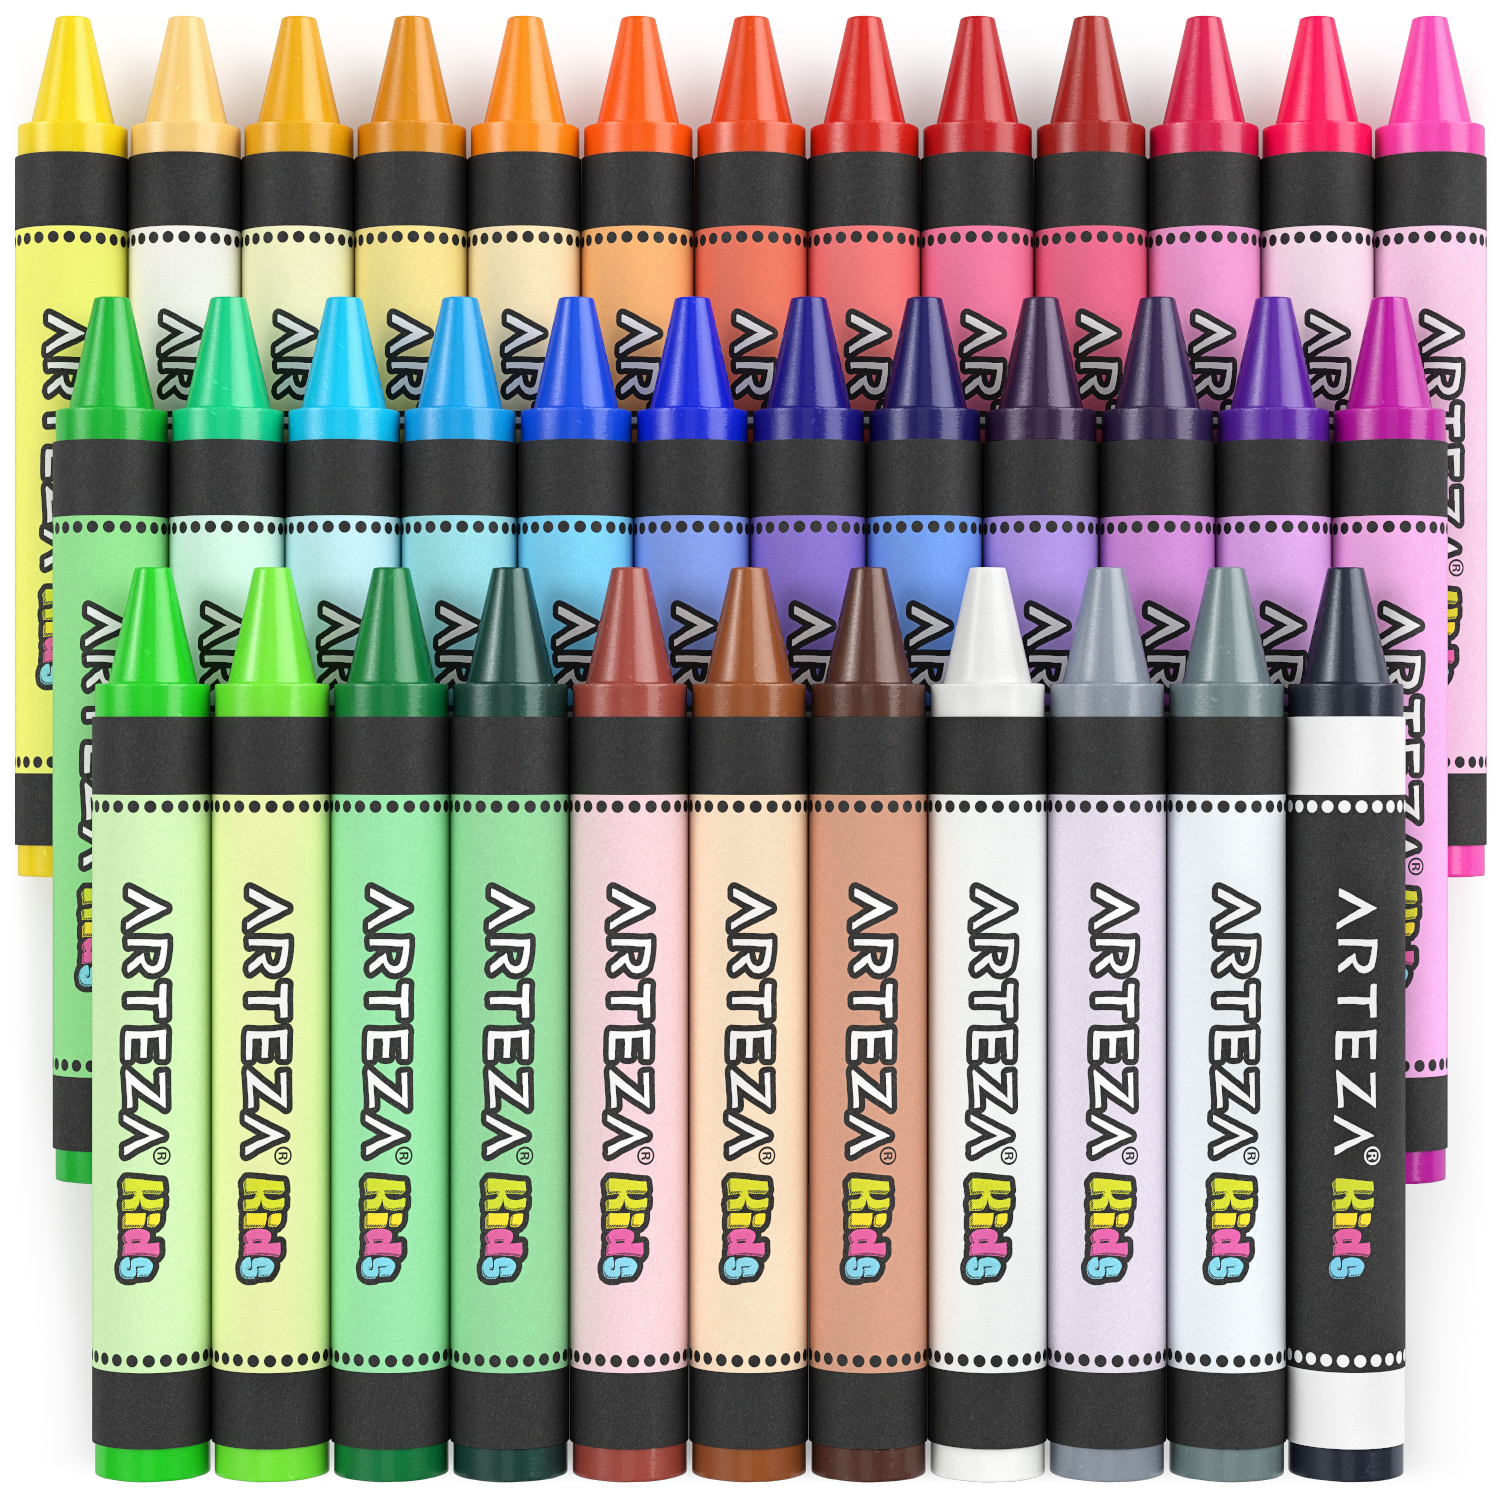 Jumbo Crayons All-in-One Crayon 8 Colors,Kids Art Supplies Suitable for Toddlers Kids Children Adults Painting Crayon Crafts Art Painting Coloring